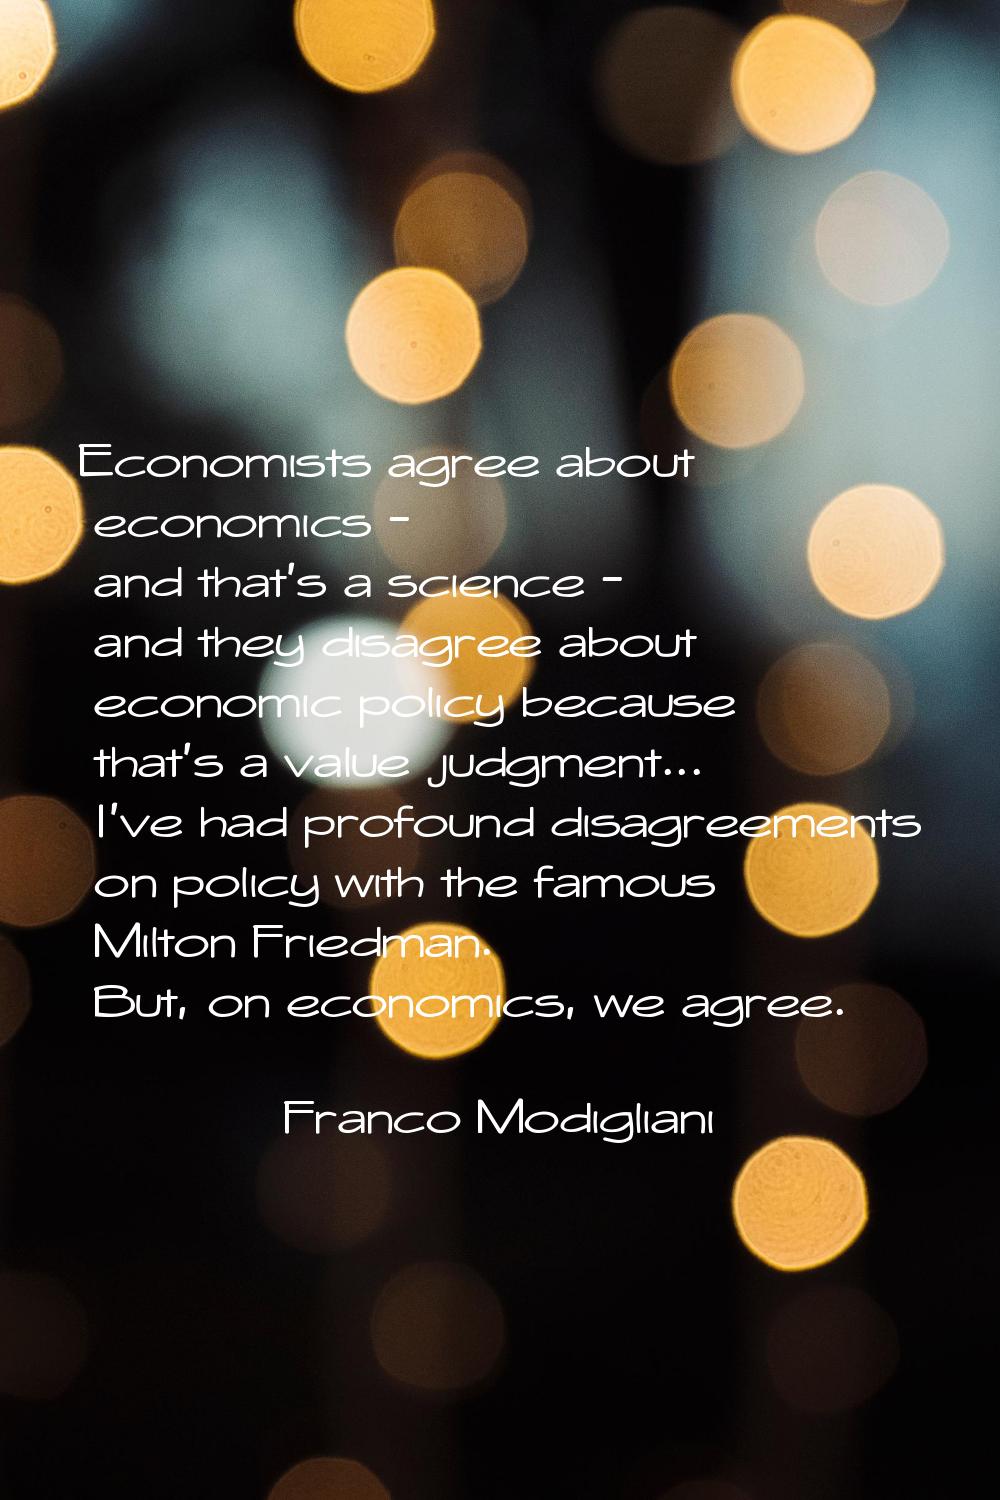 Economists agree about economics - and that's a science - and they disagree about economic policy b